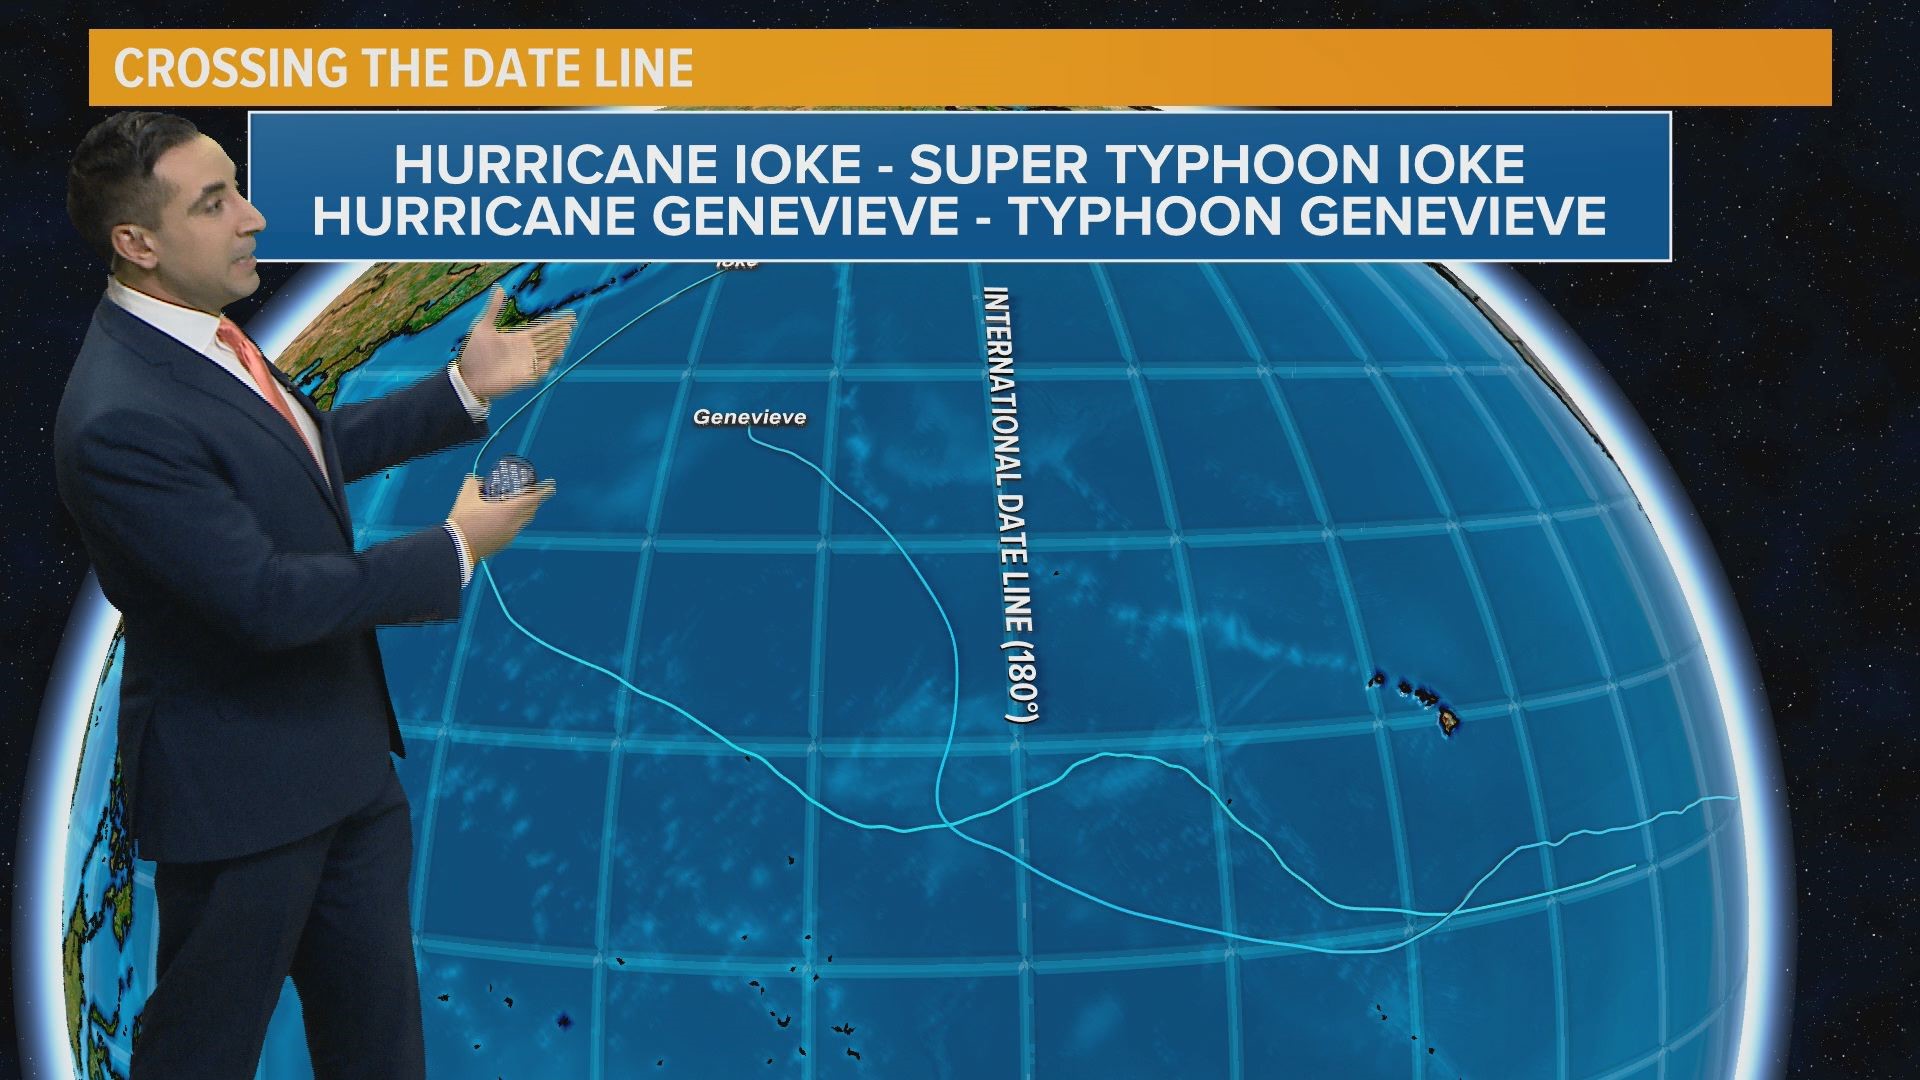 13News Now meteorologist Tim Pandajis on the difference between a hurricane and a typhoon.